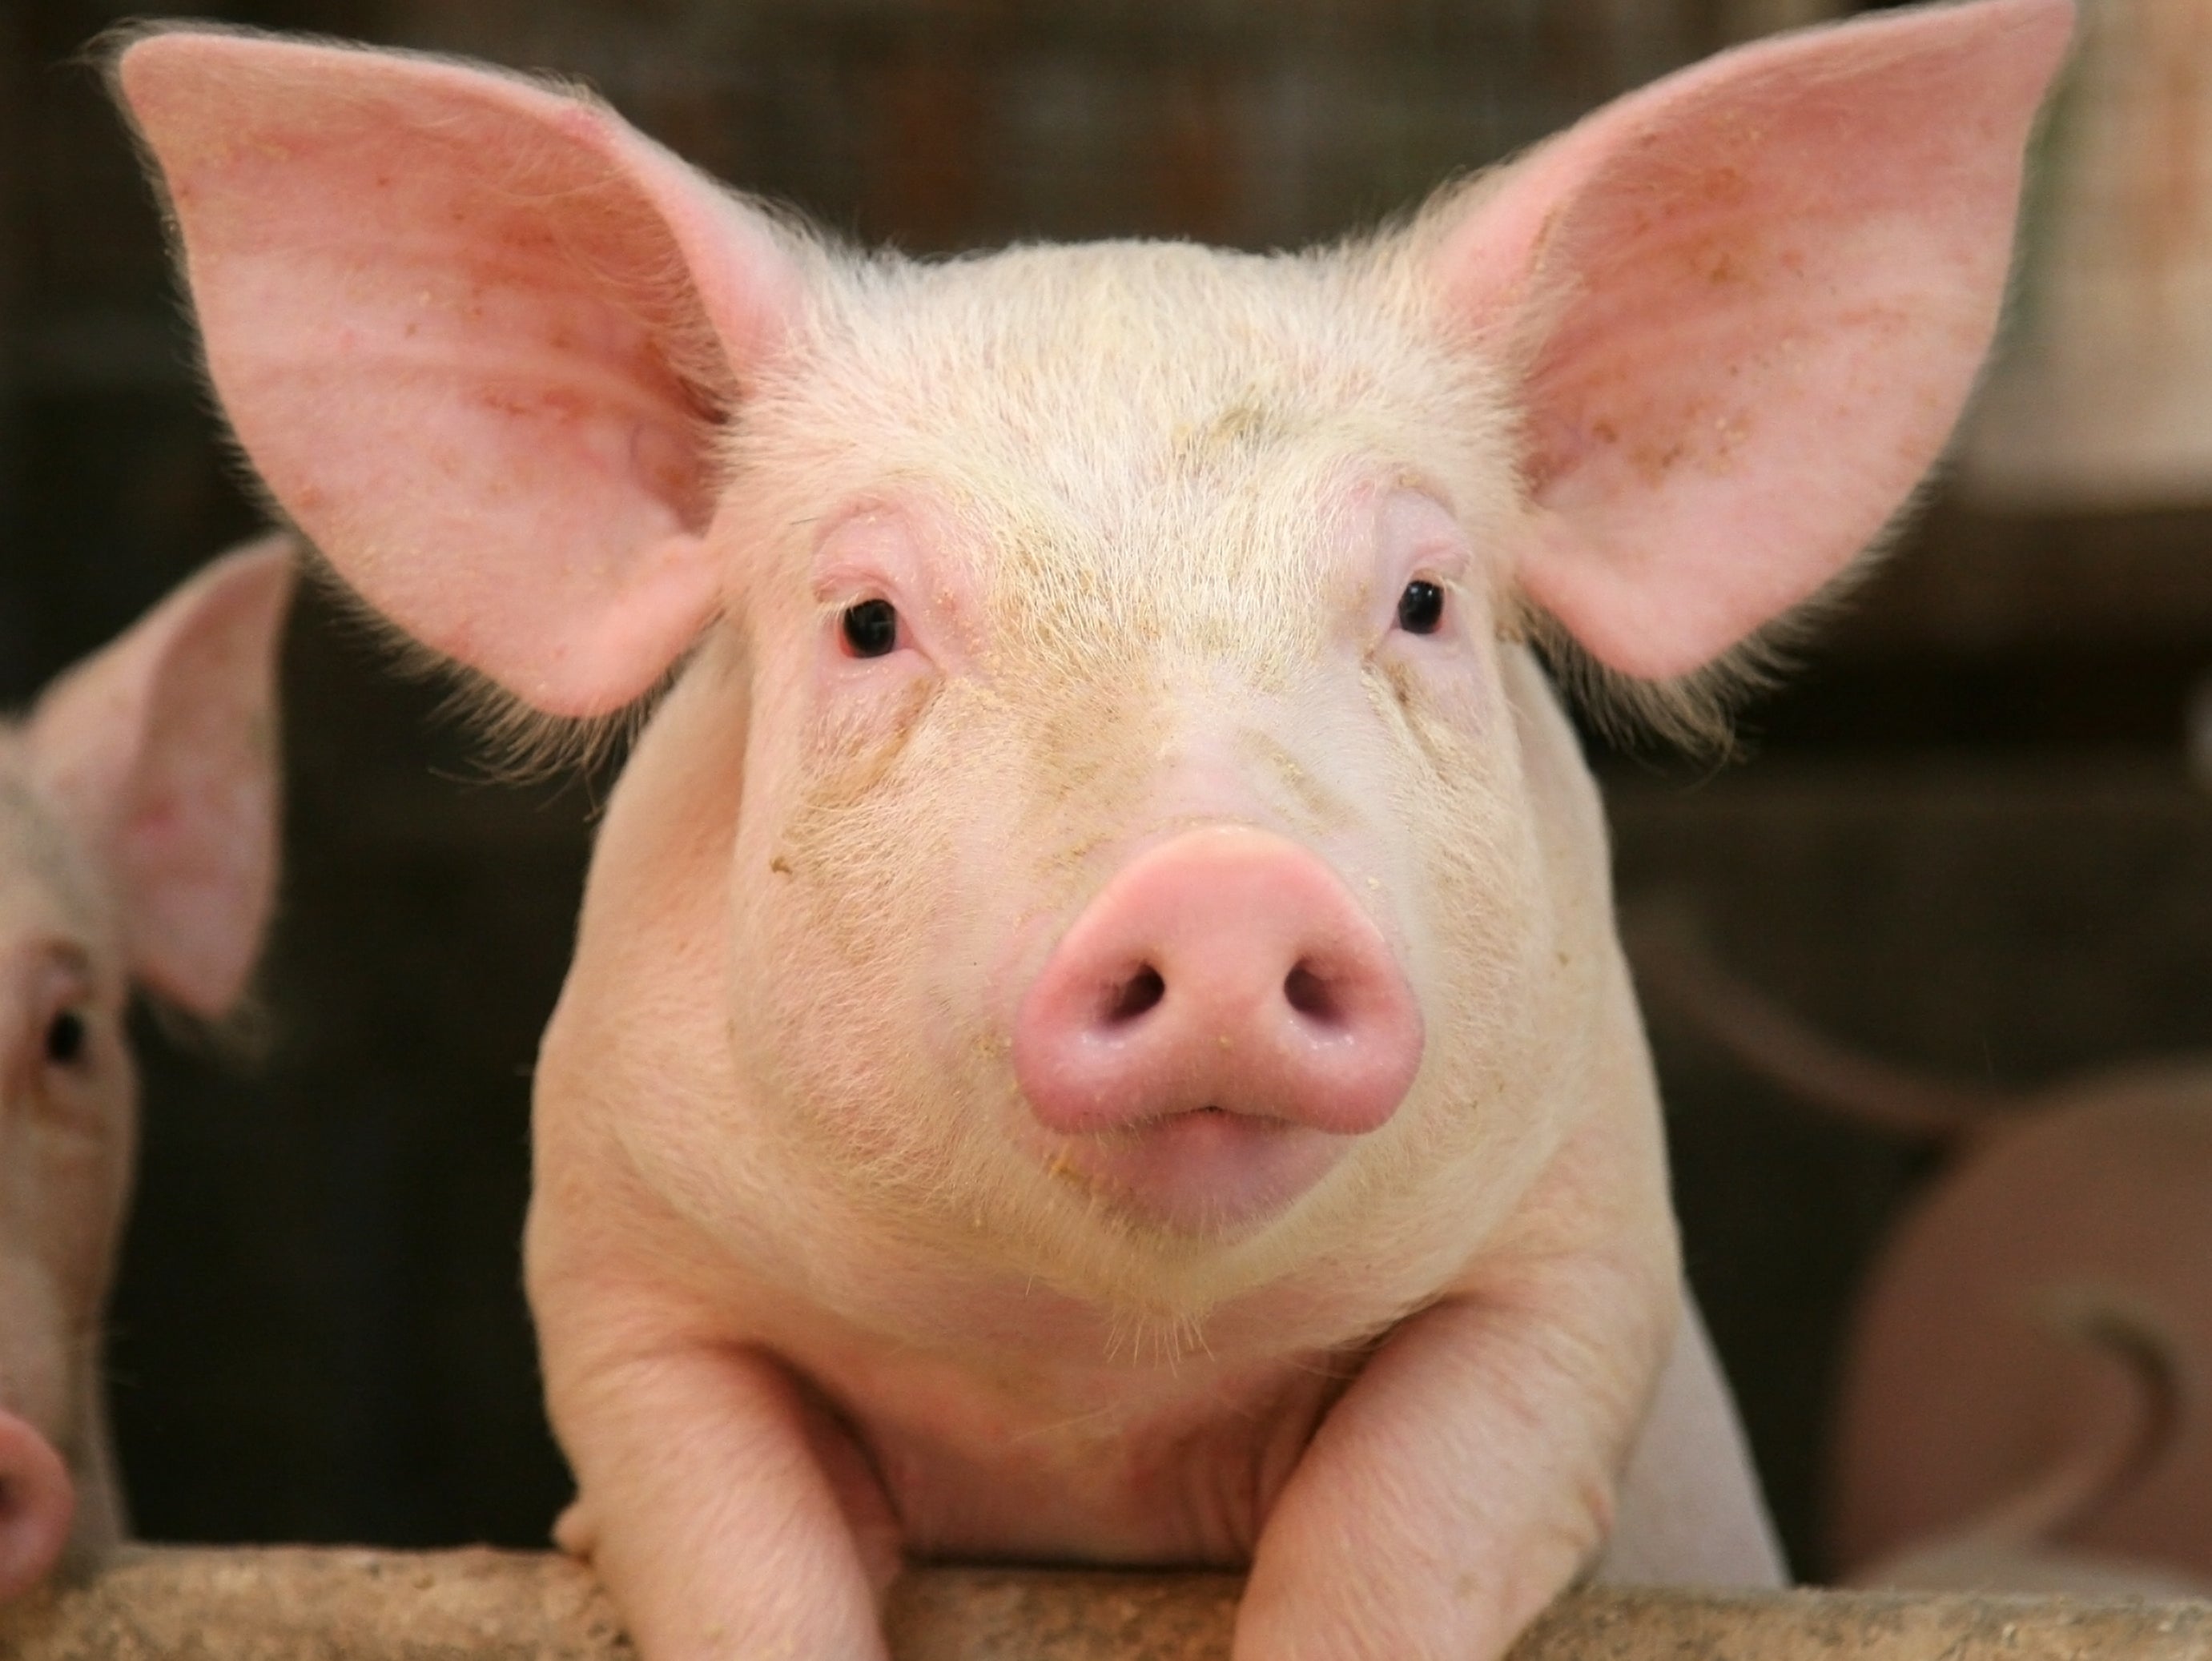 About 120,000 pigs are expected to be shot with a captive bolt